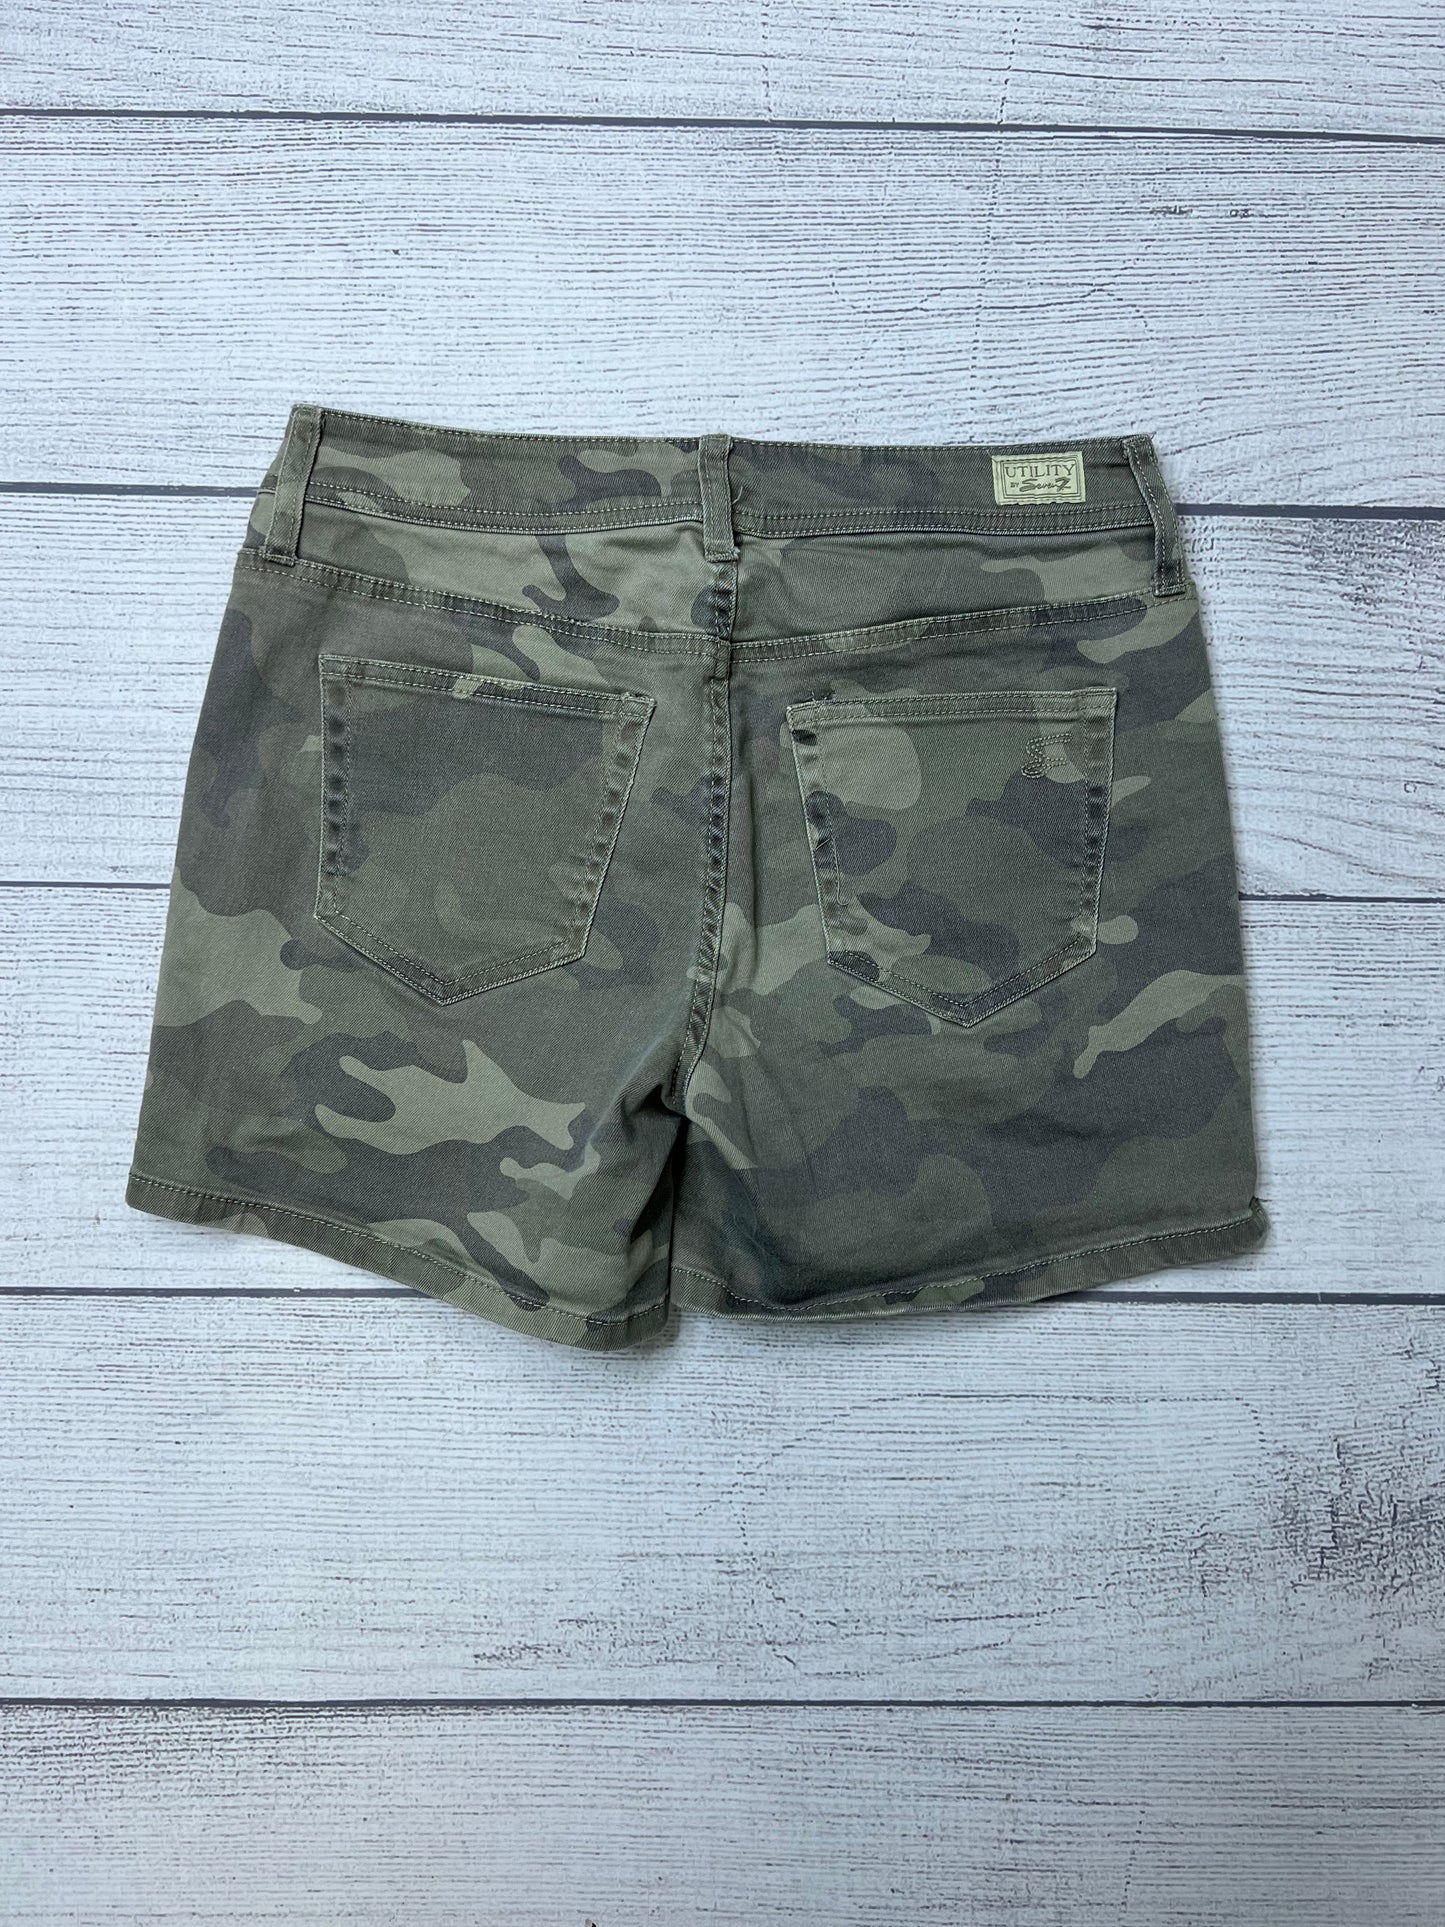 Shorts Designer By 7 For All Mankind  Size: 4